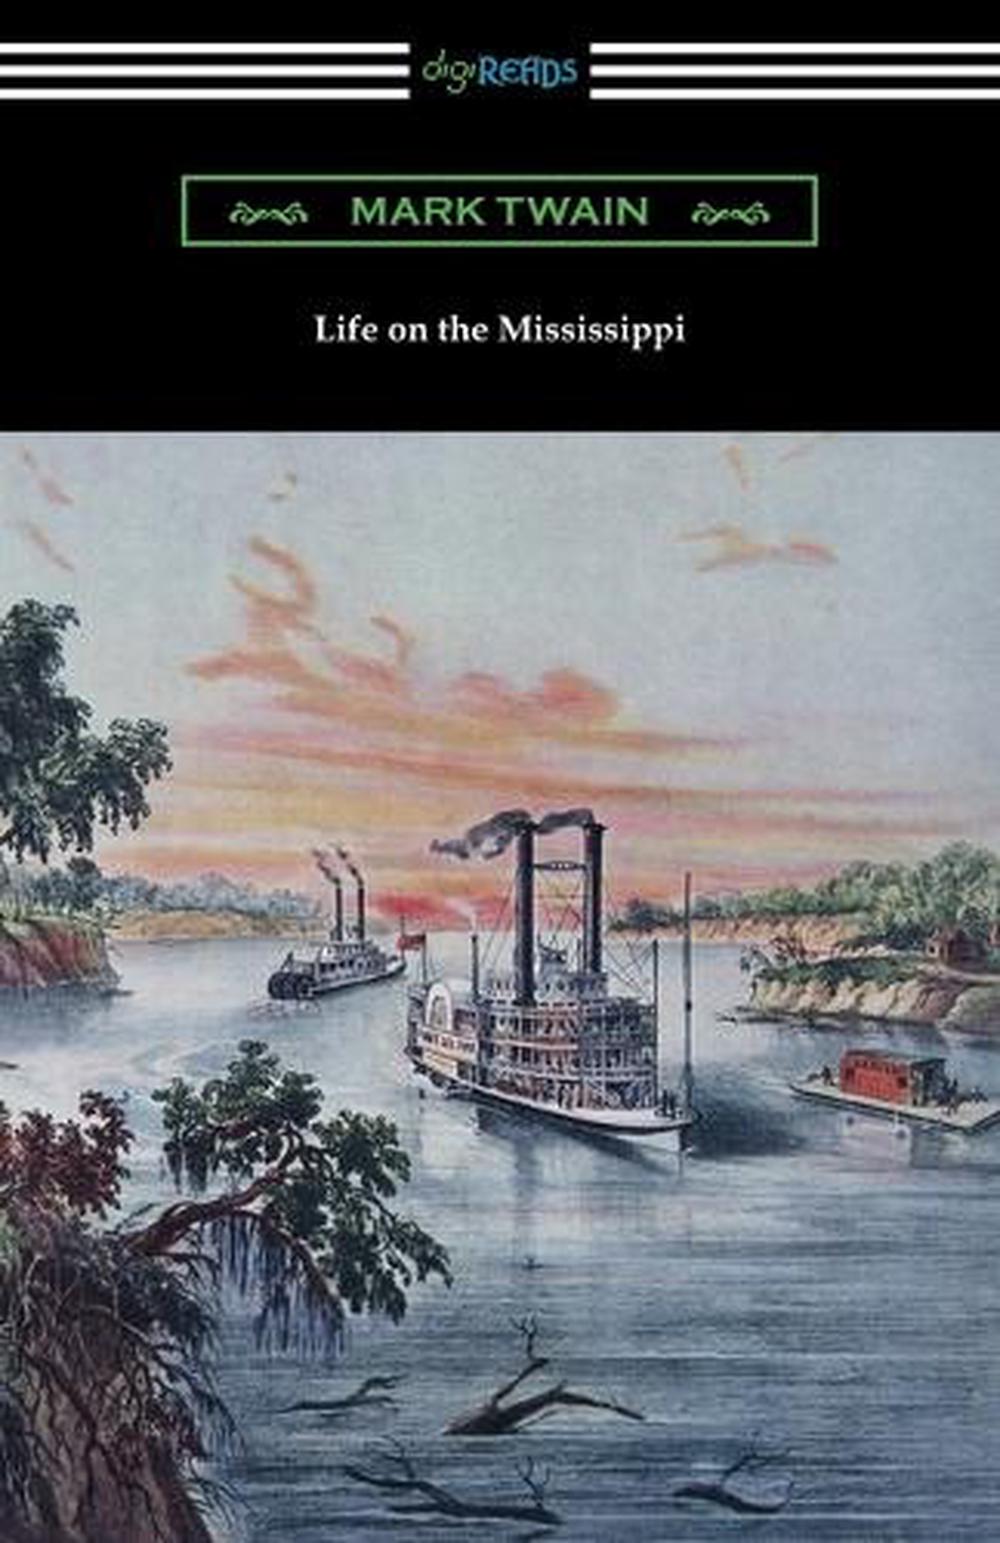 from life on the mississippi by mark twain